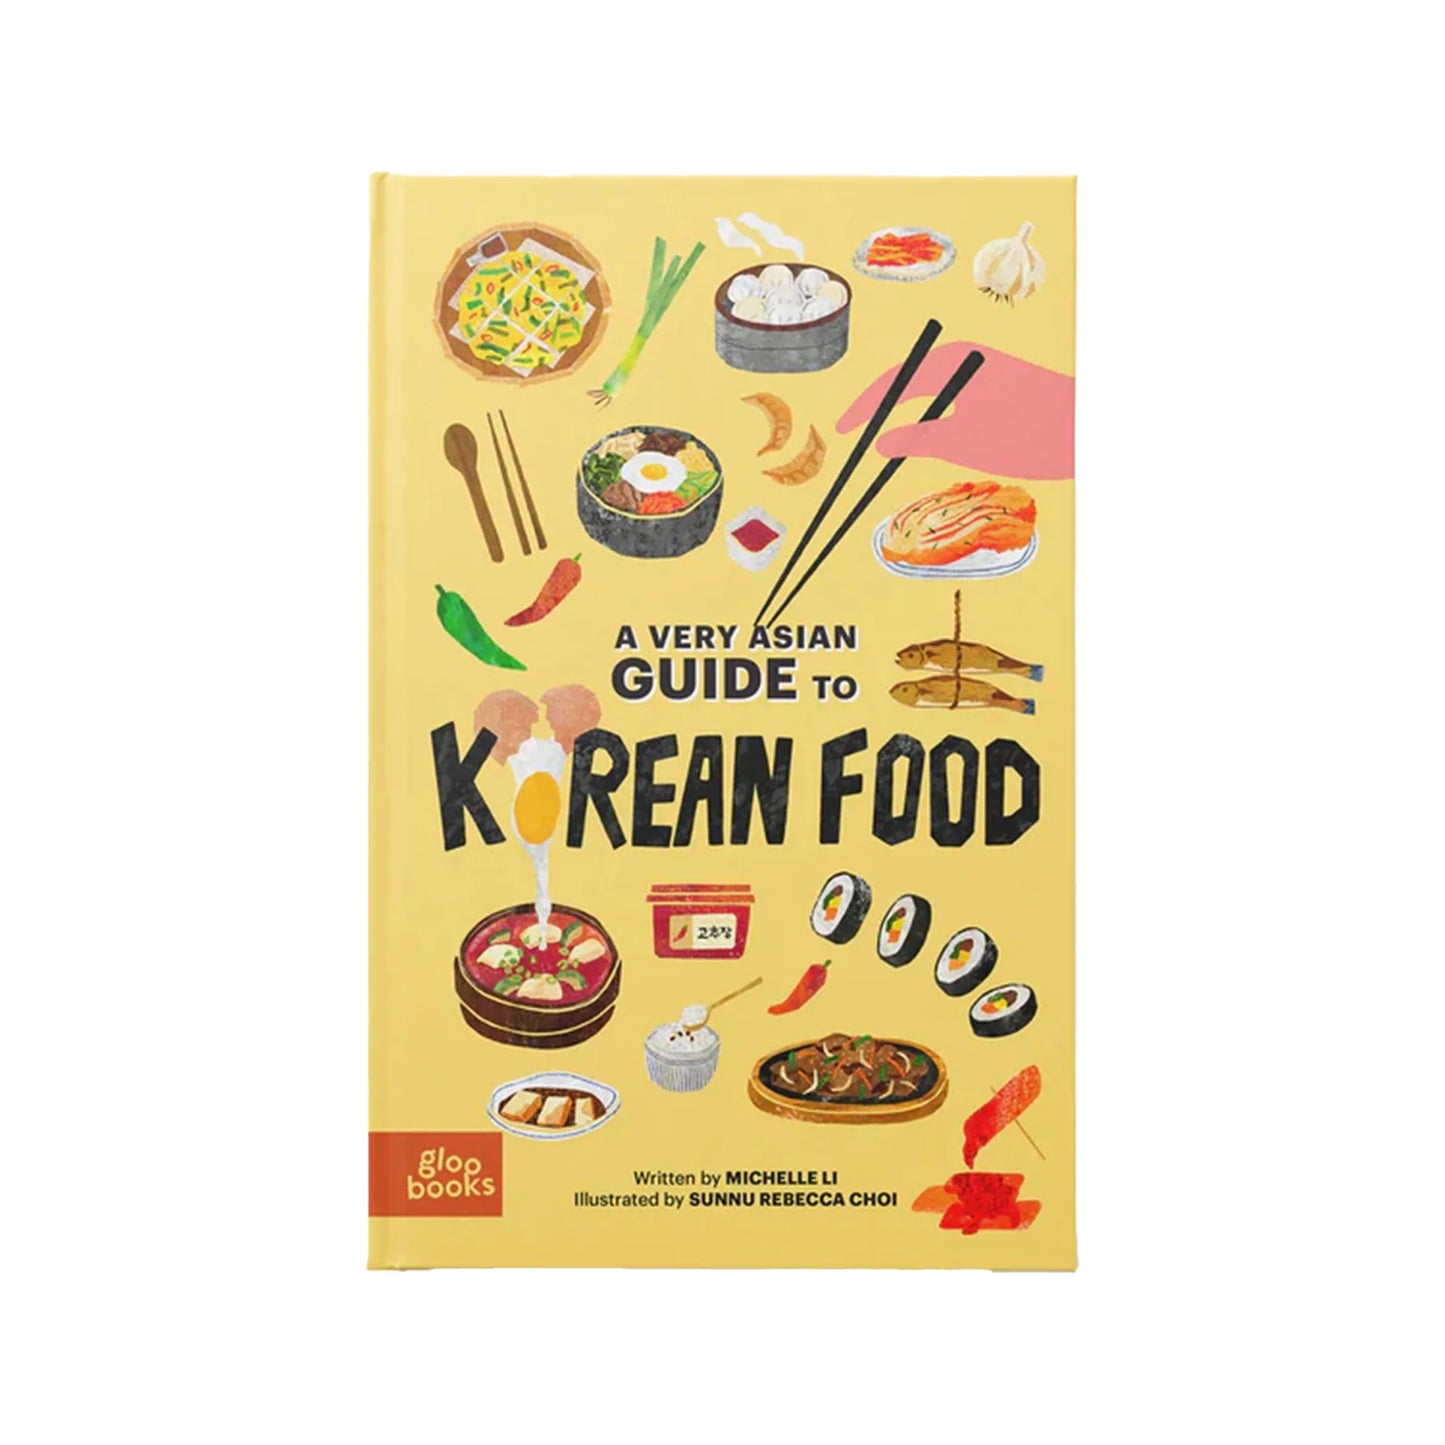 A Very Asian Guide to Korean Food - Hardcover Picture Book